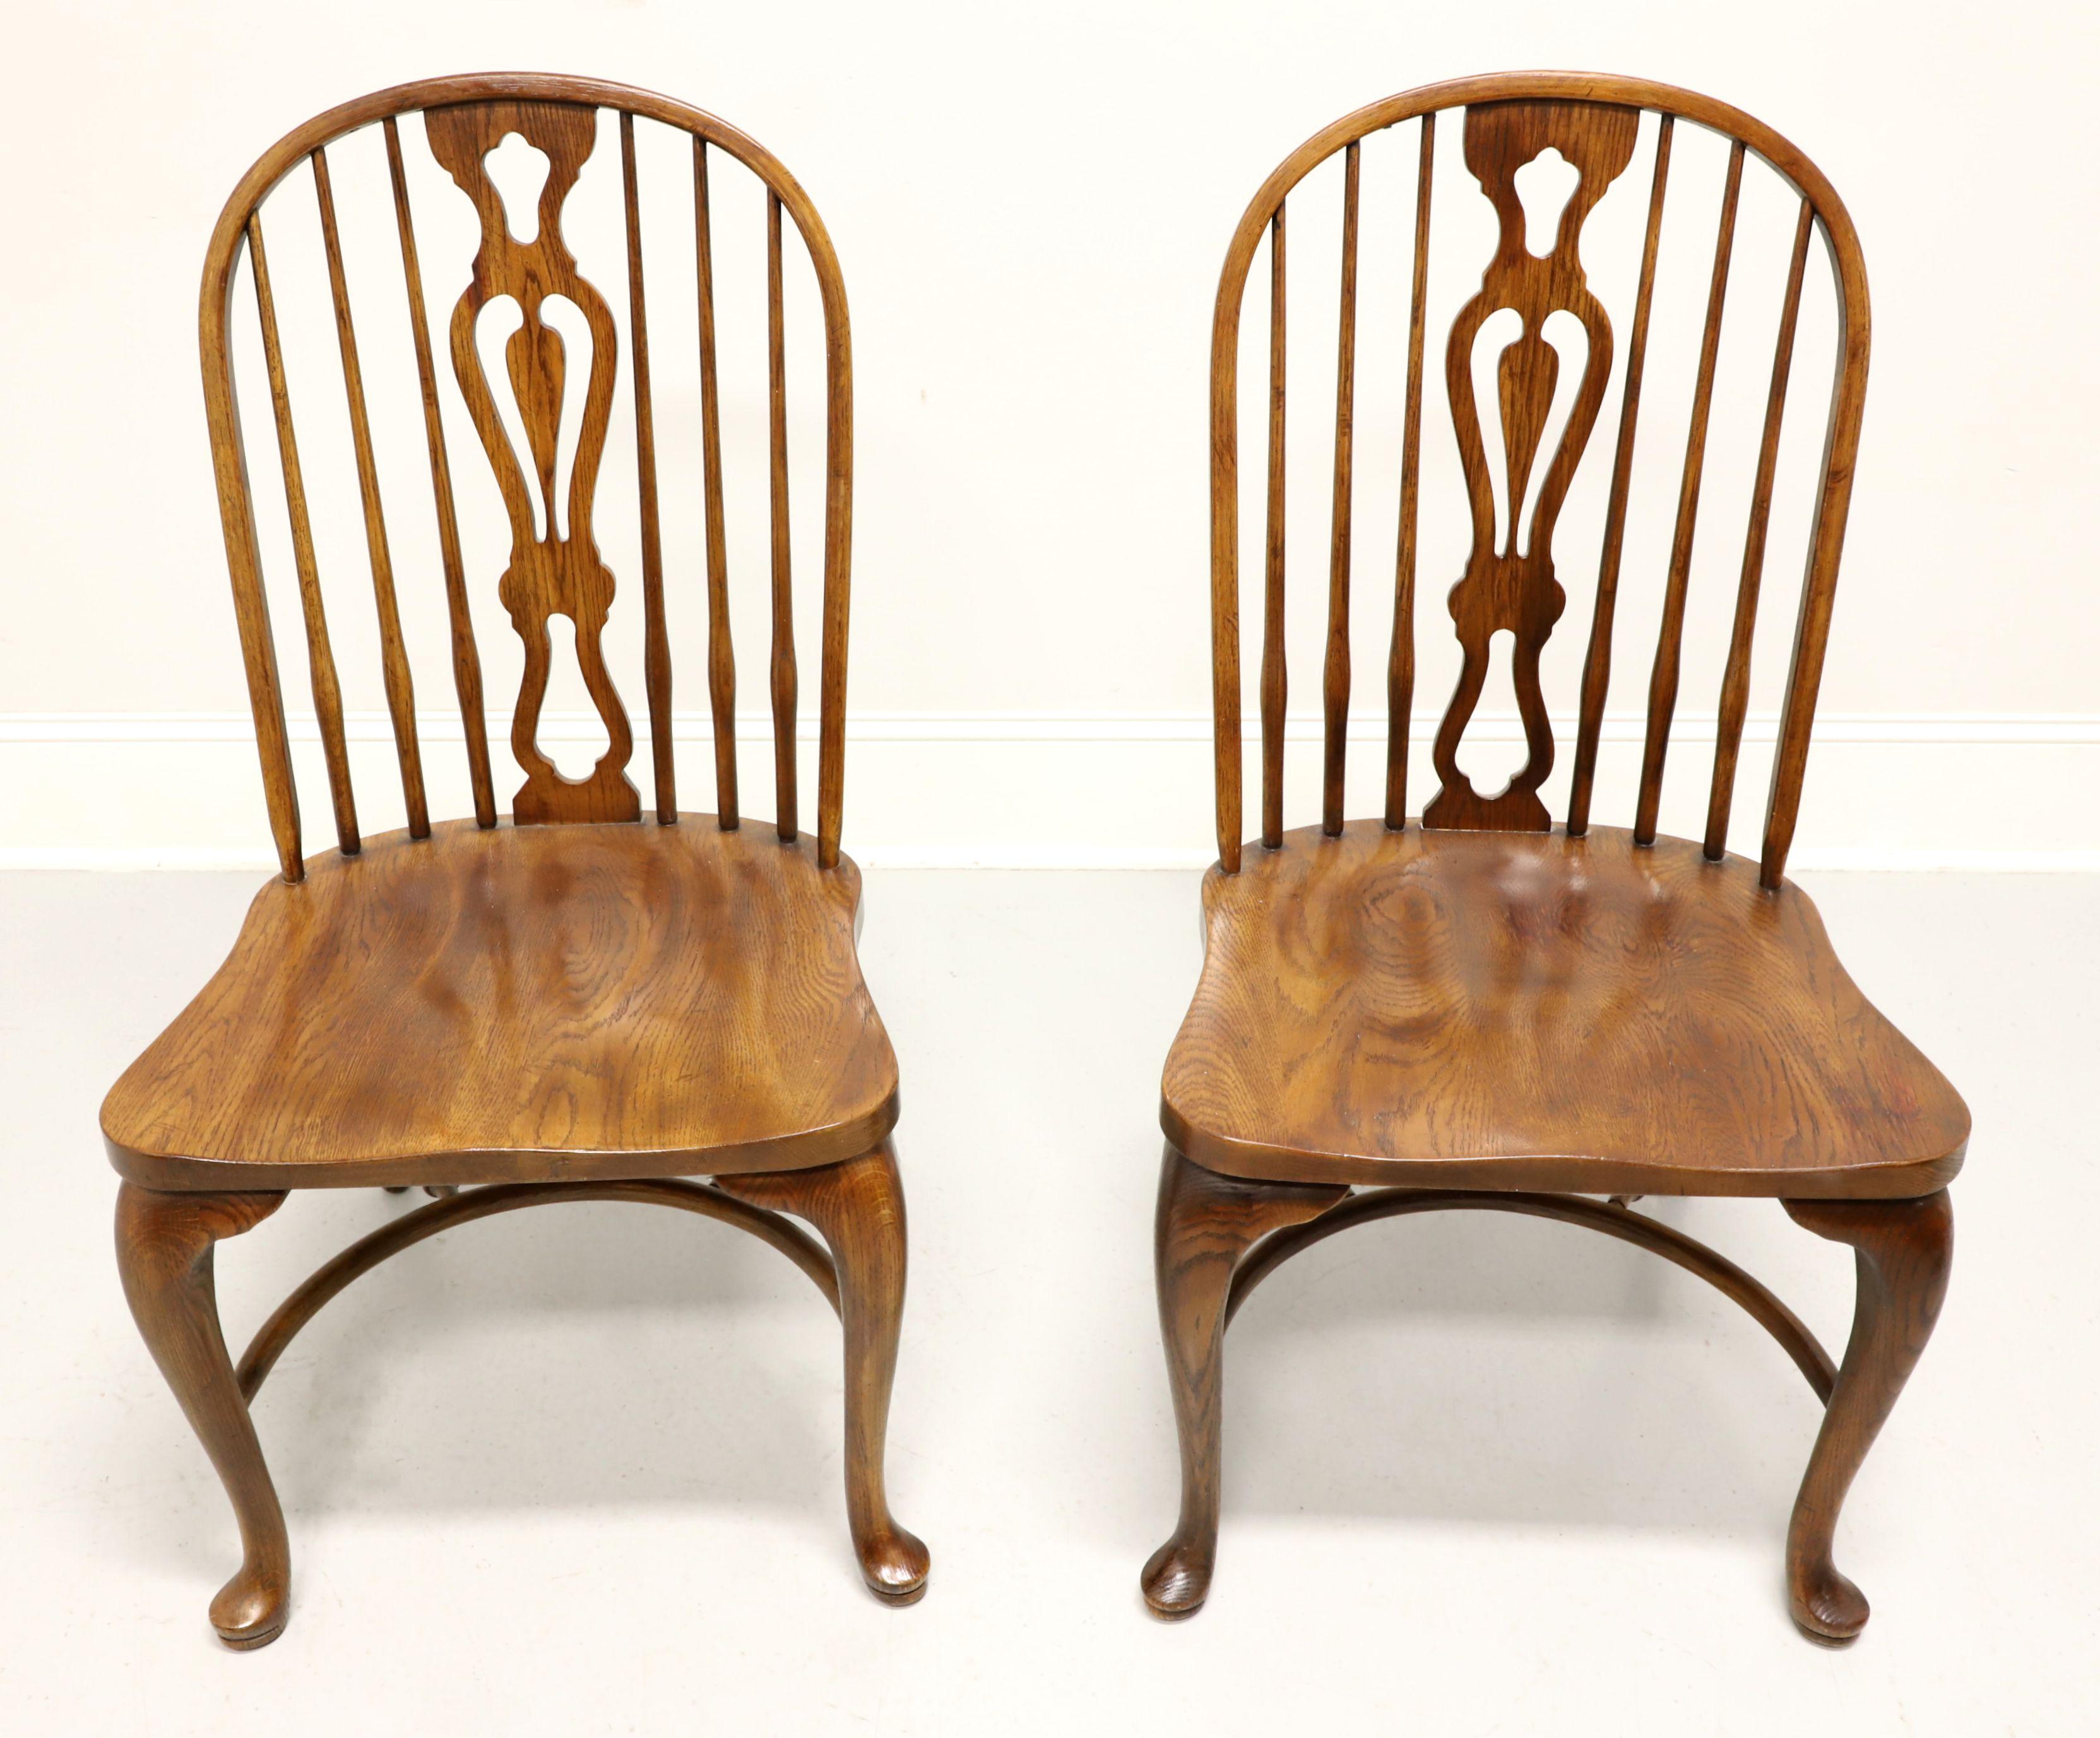 A pair of Windsor style dining side chairs by Drexel Heritage. Solid oak, hoop back with spindles, decoratively carved backrest, saddle shape seat, cabriole front legs with pad feet, turned back legs and arched front stretcher with turned back